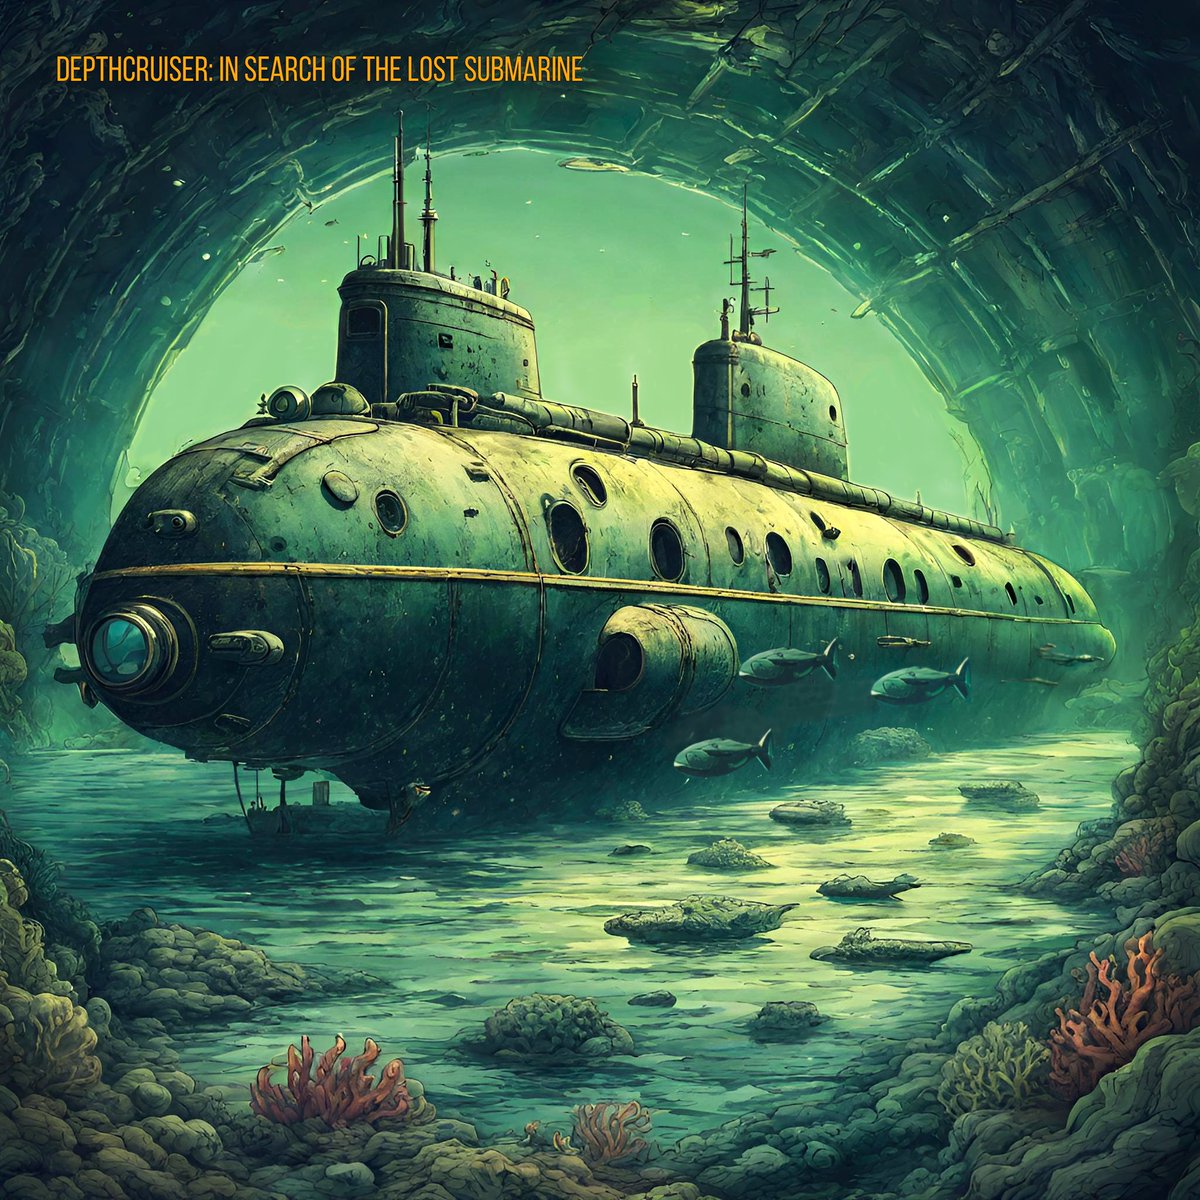 EP “In Search of the Lost Submarine” on #Bandcamp 👽 depthcruiser.bandcamp.com/album/in-searc…